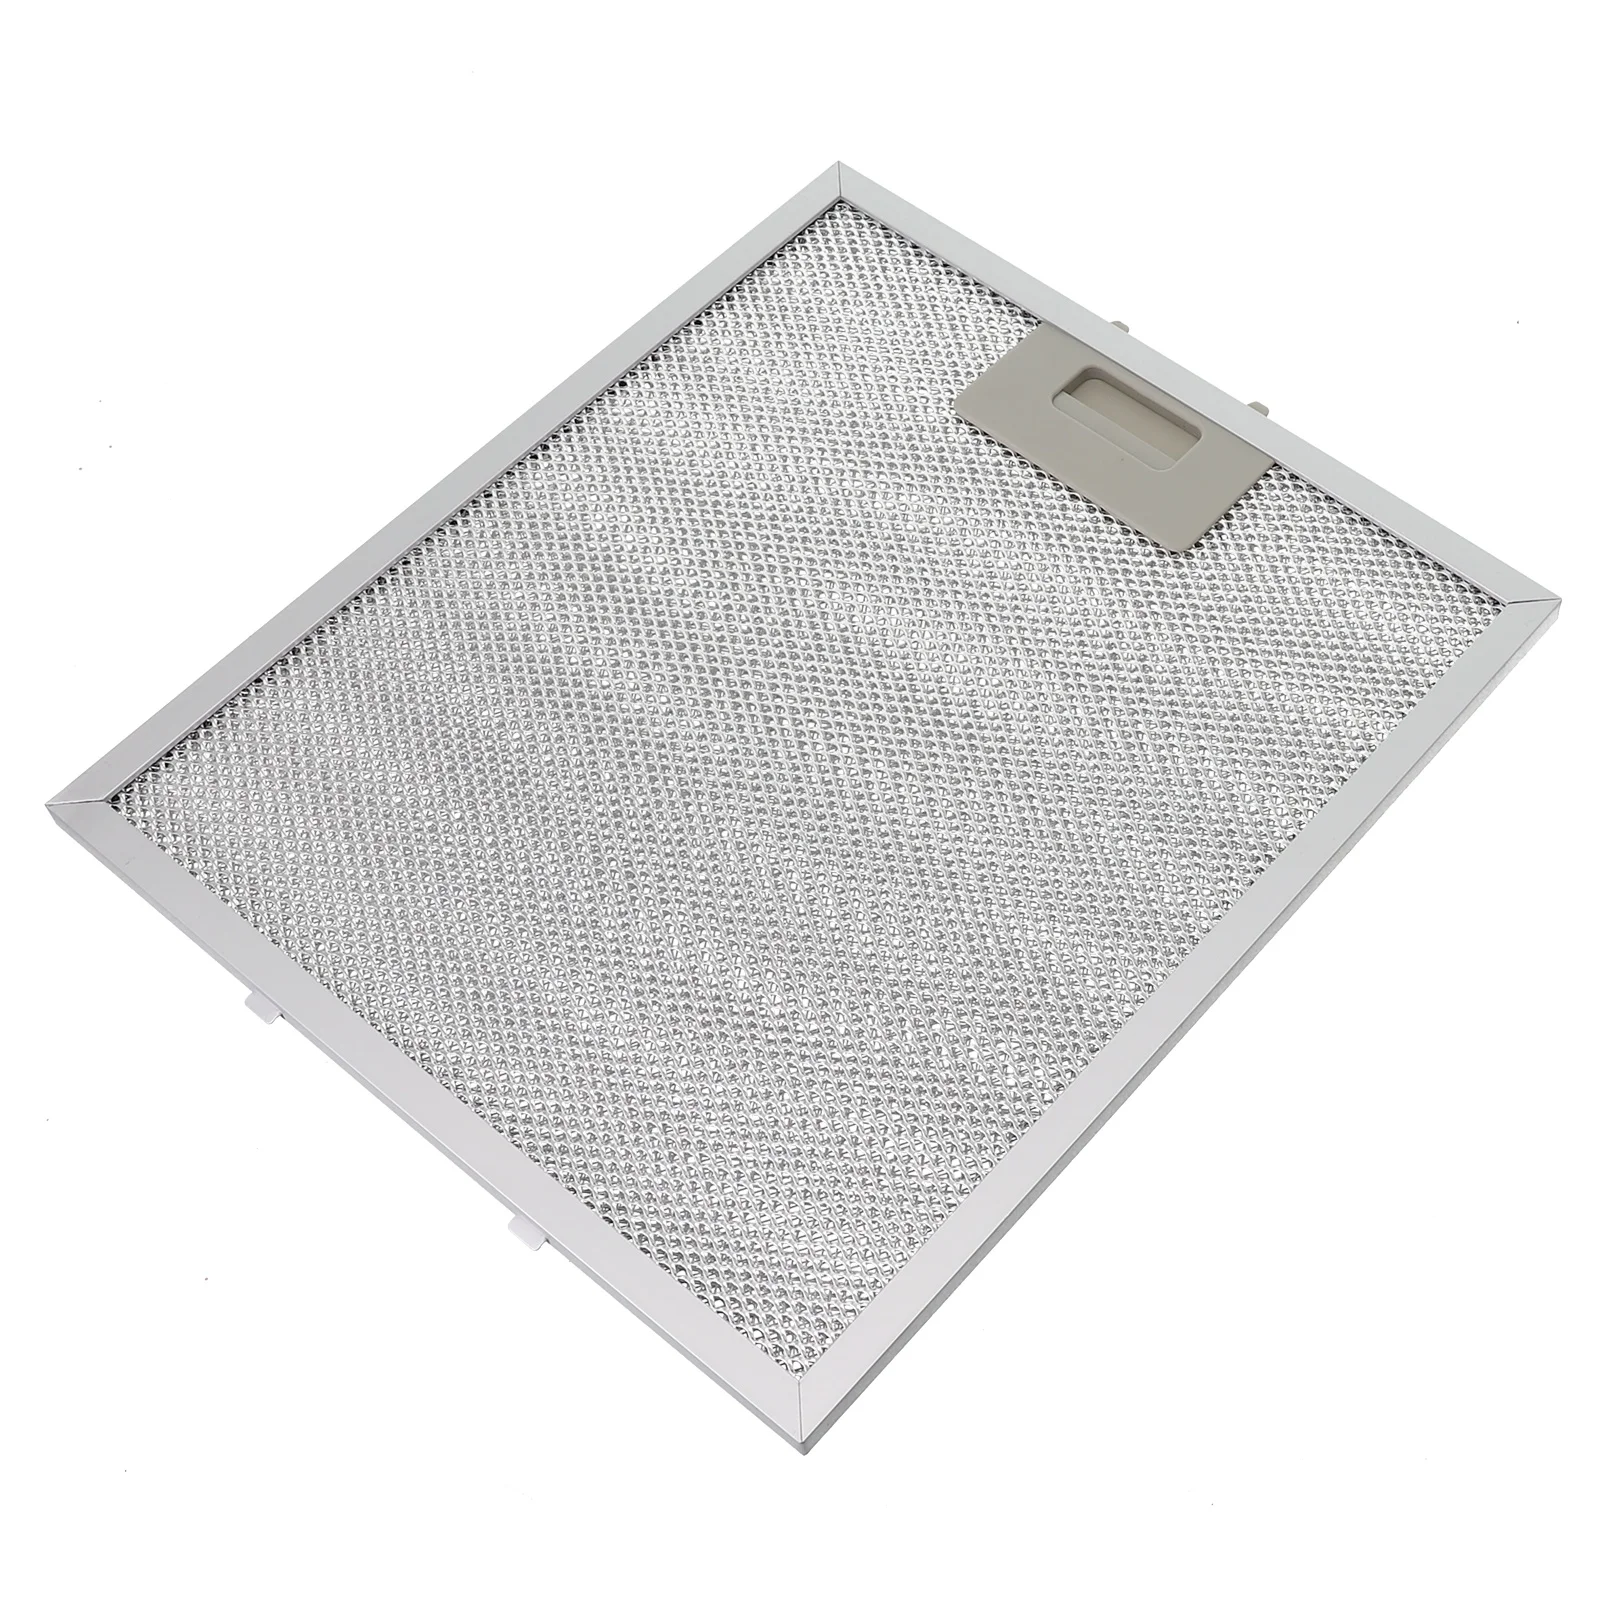 Range Hood Vents Silver Silver Cooker Stainless Steel Vent Filter Filter Hood Filter Dimensions:305 X 267 X 9mm